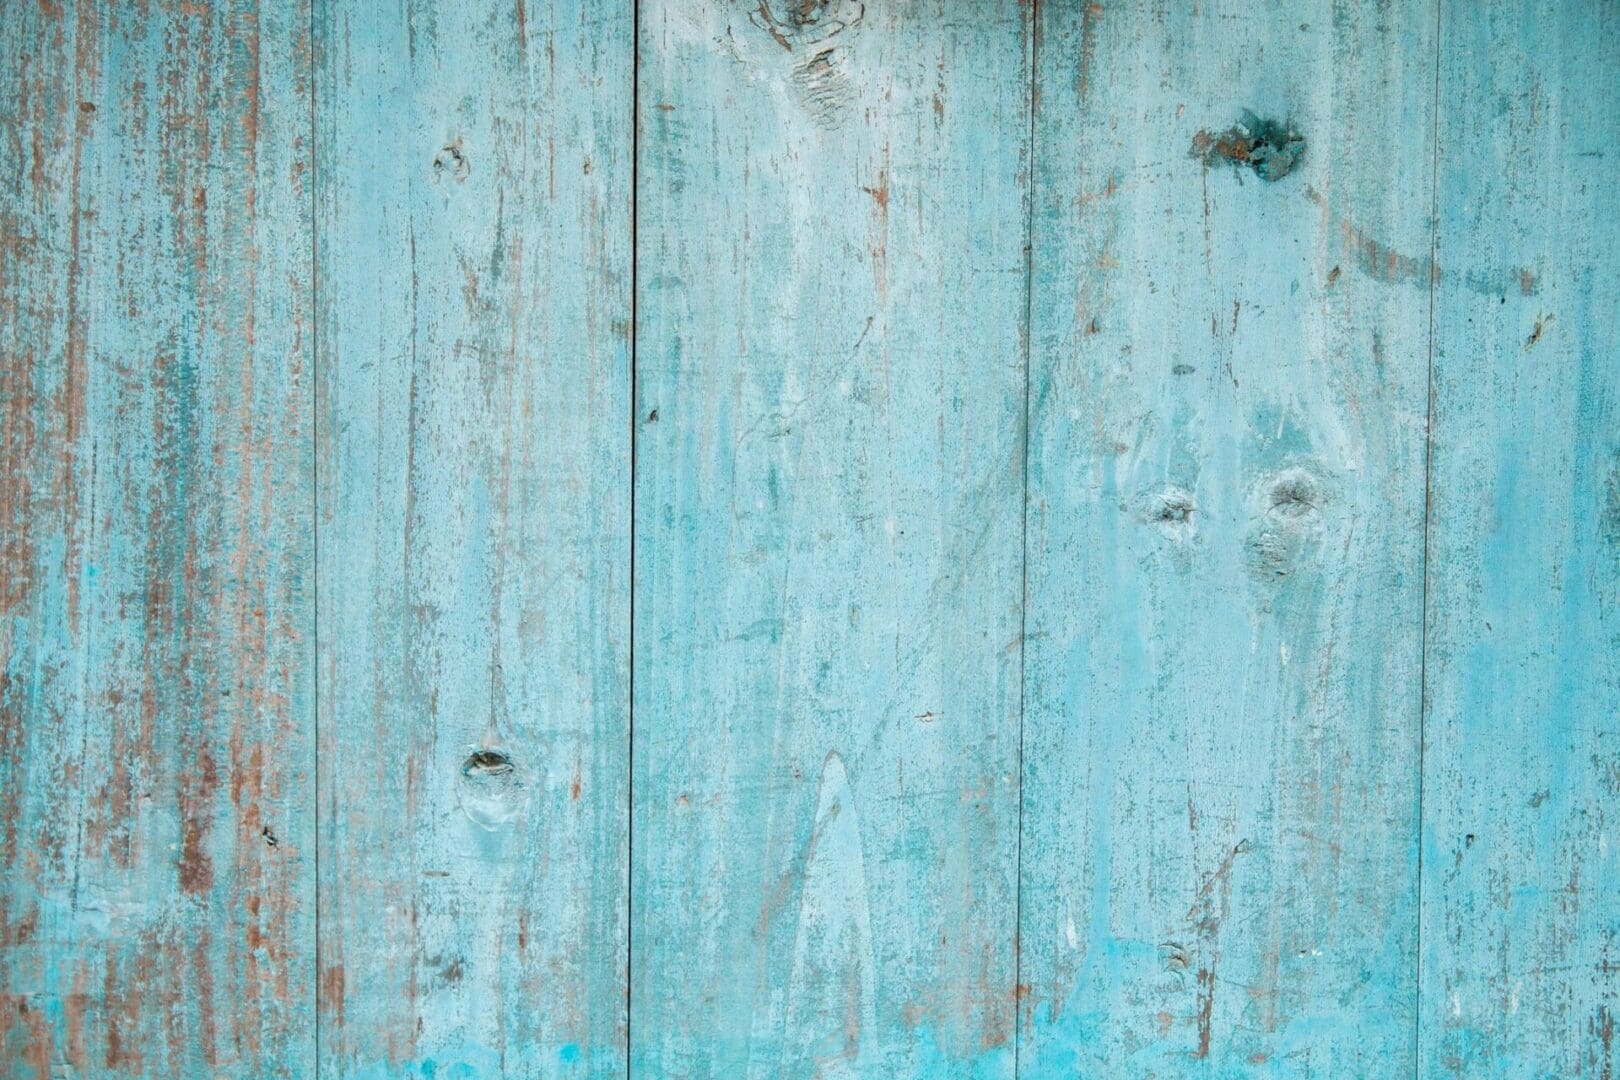 A close up of a blue painted wooden wall.